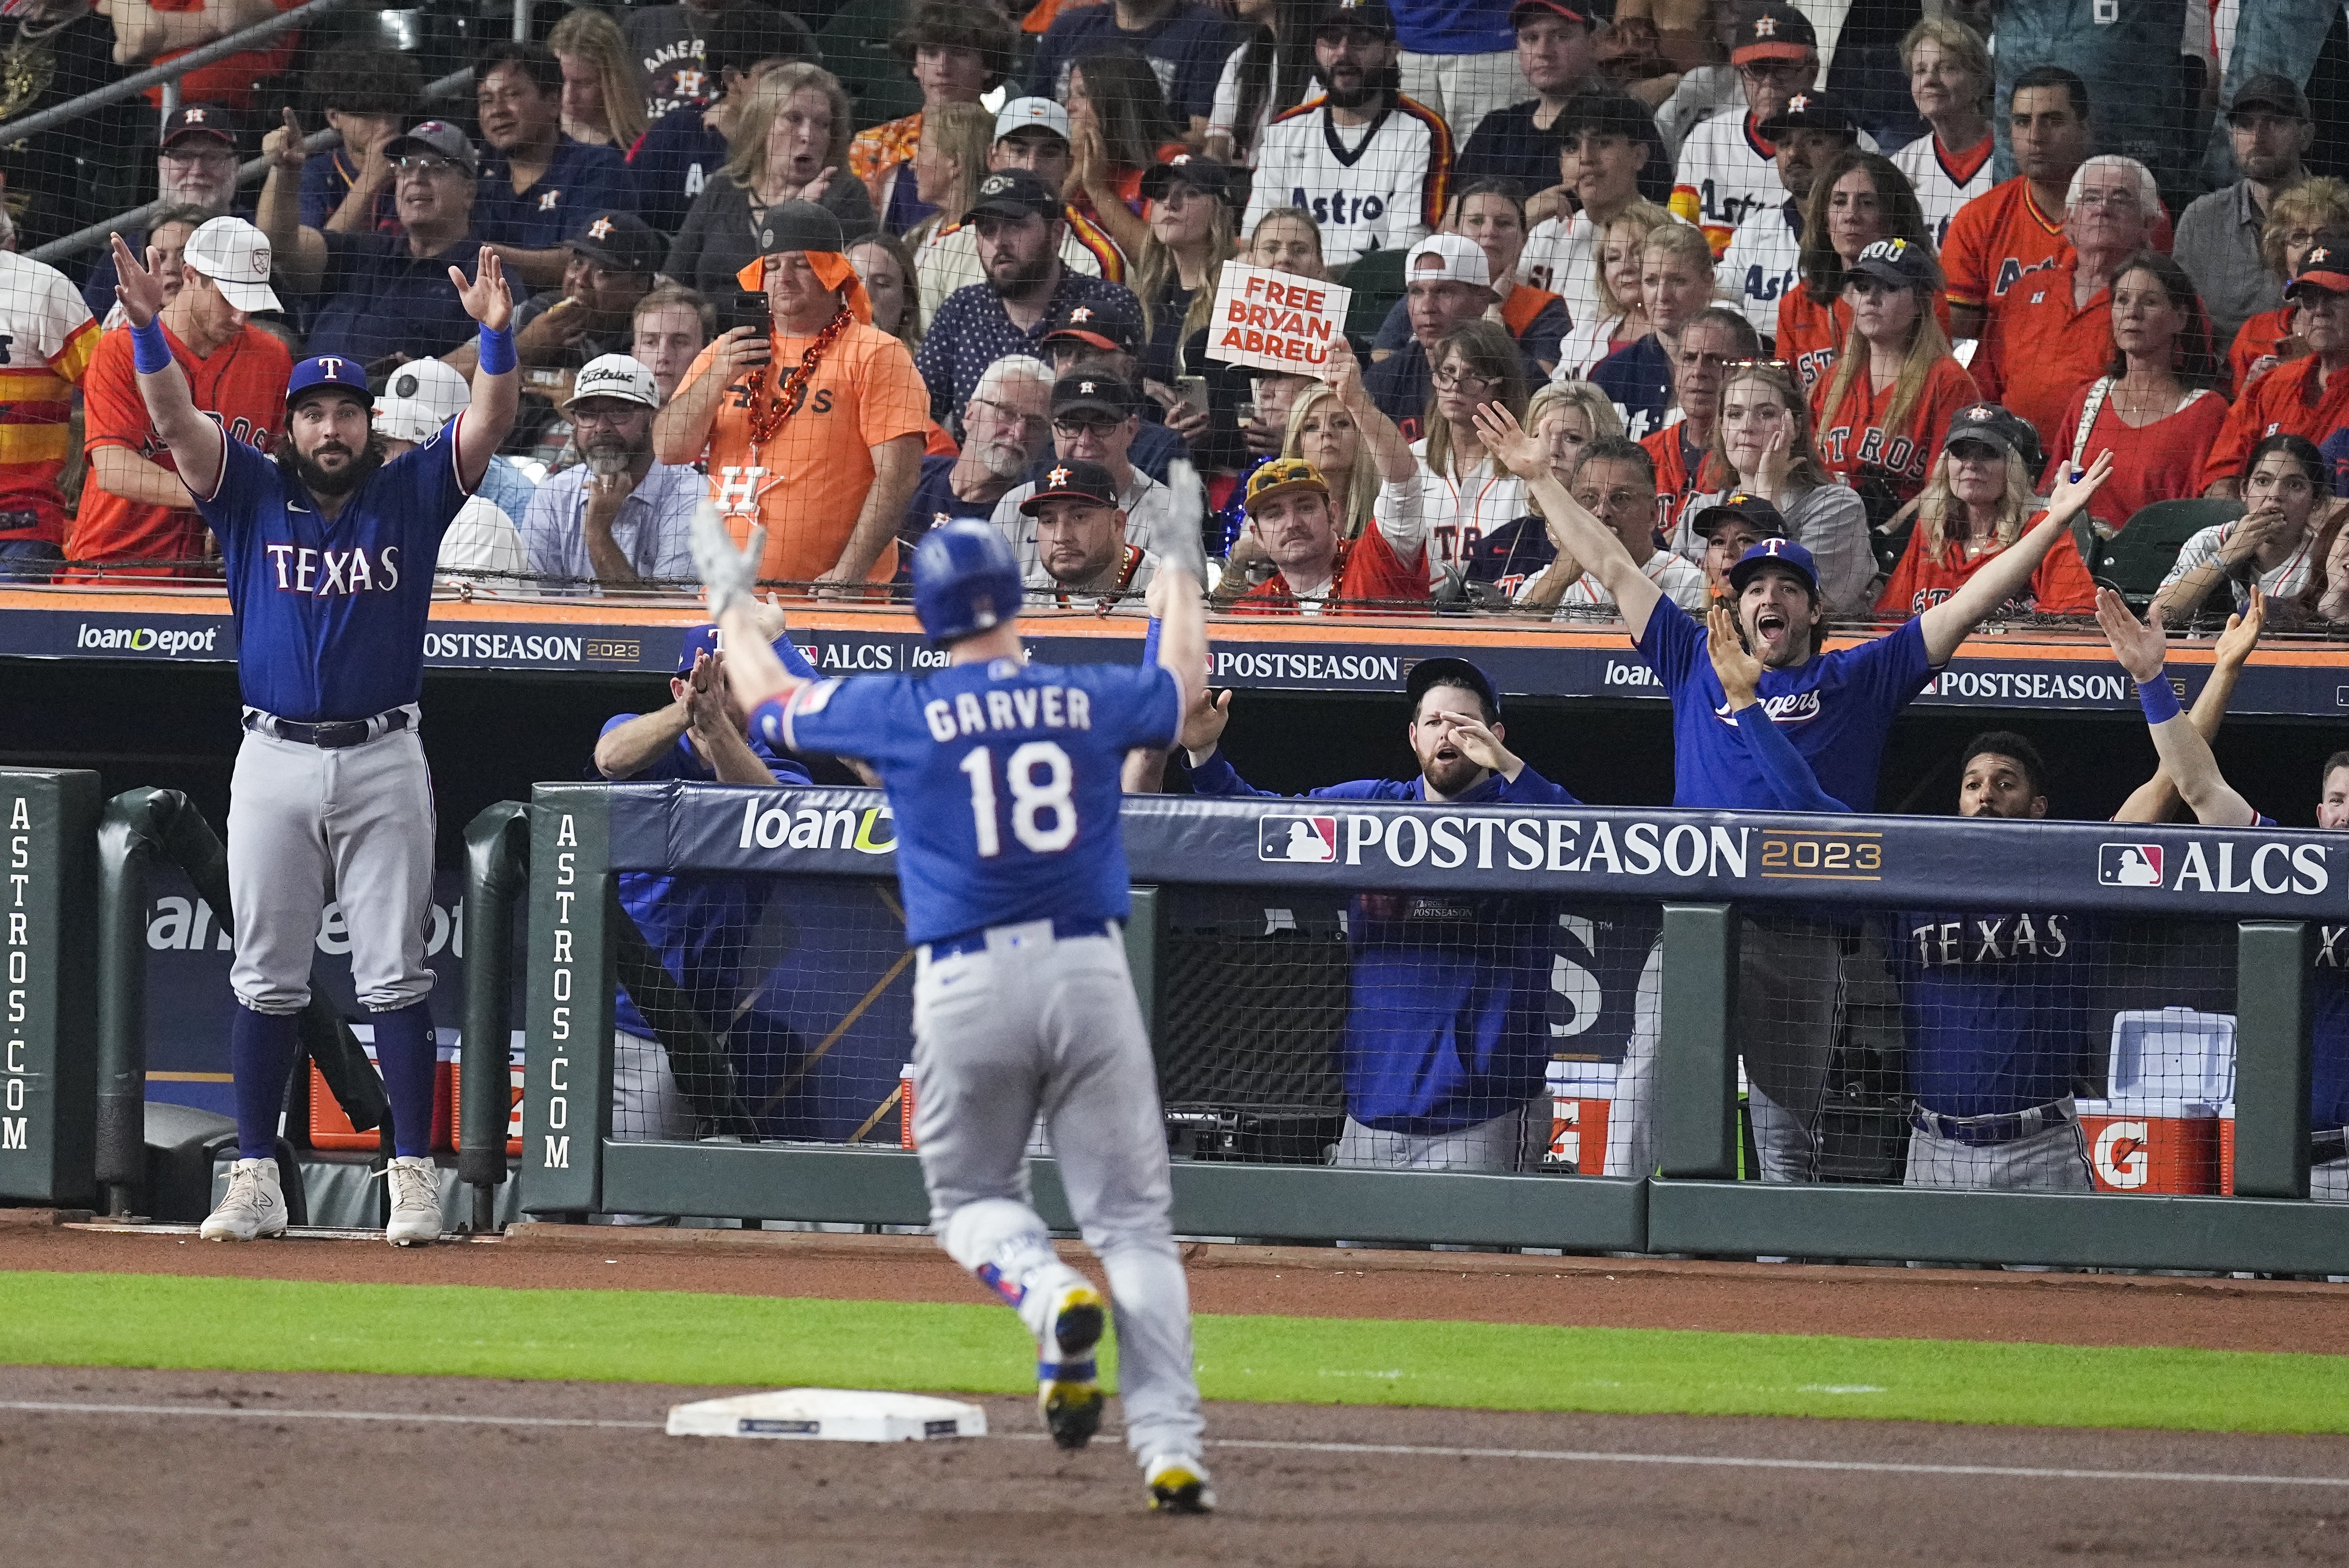 Astros vs. Rangers: How to Watch ALCS Game 5 Today, Start Time, TV